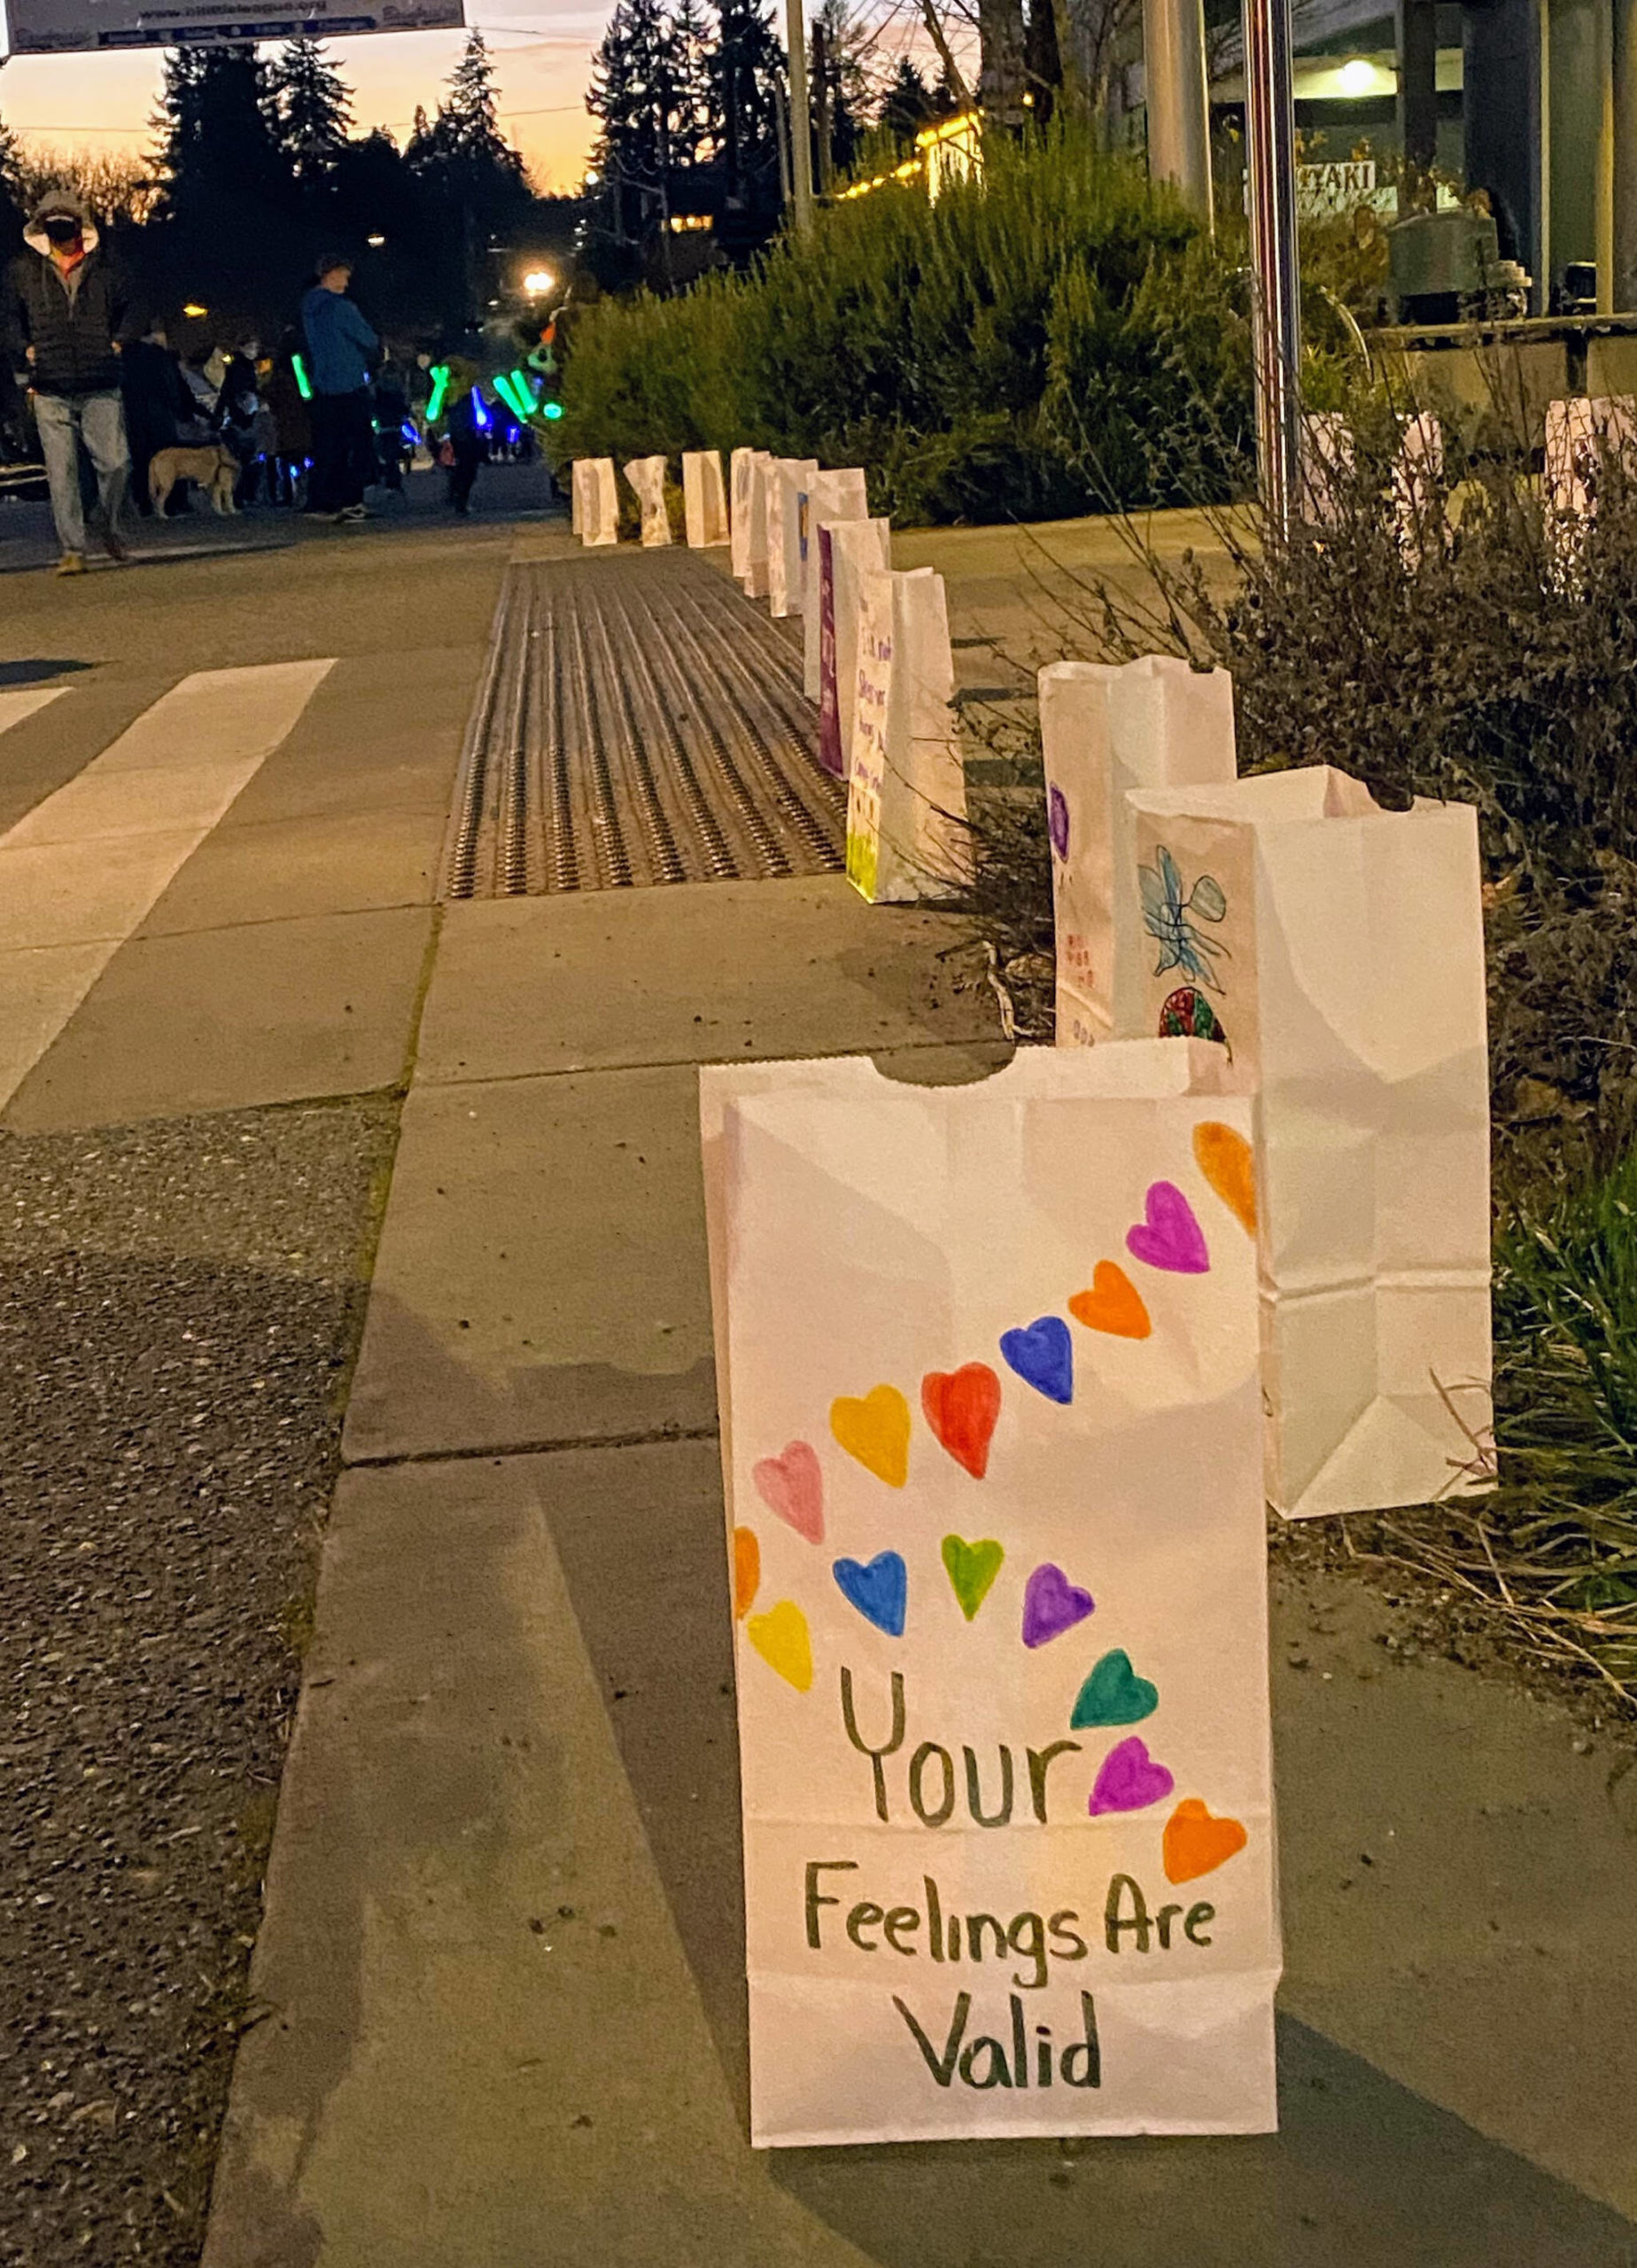 The luminaria bags were placed along Winslow Way.